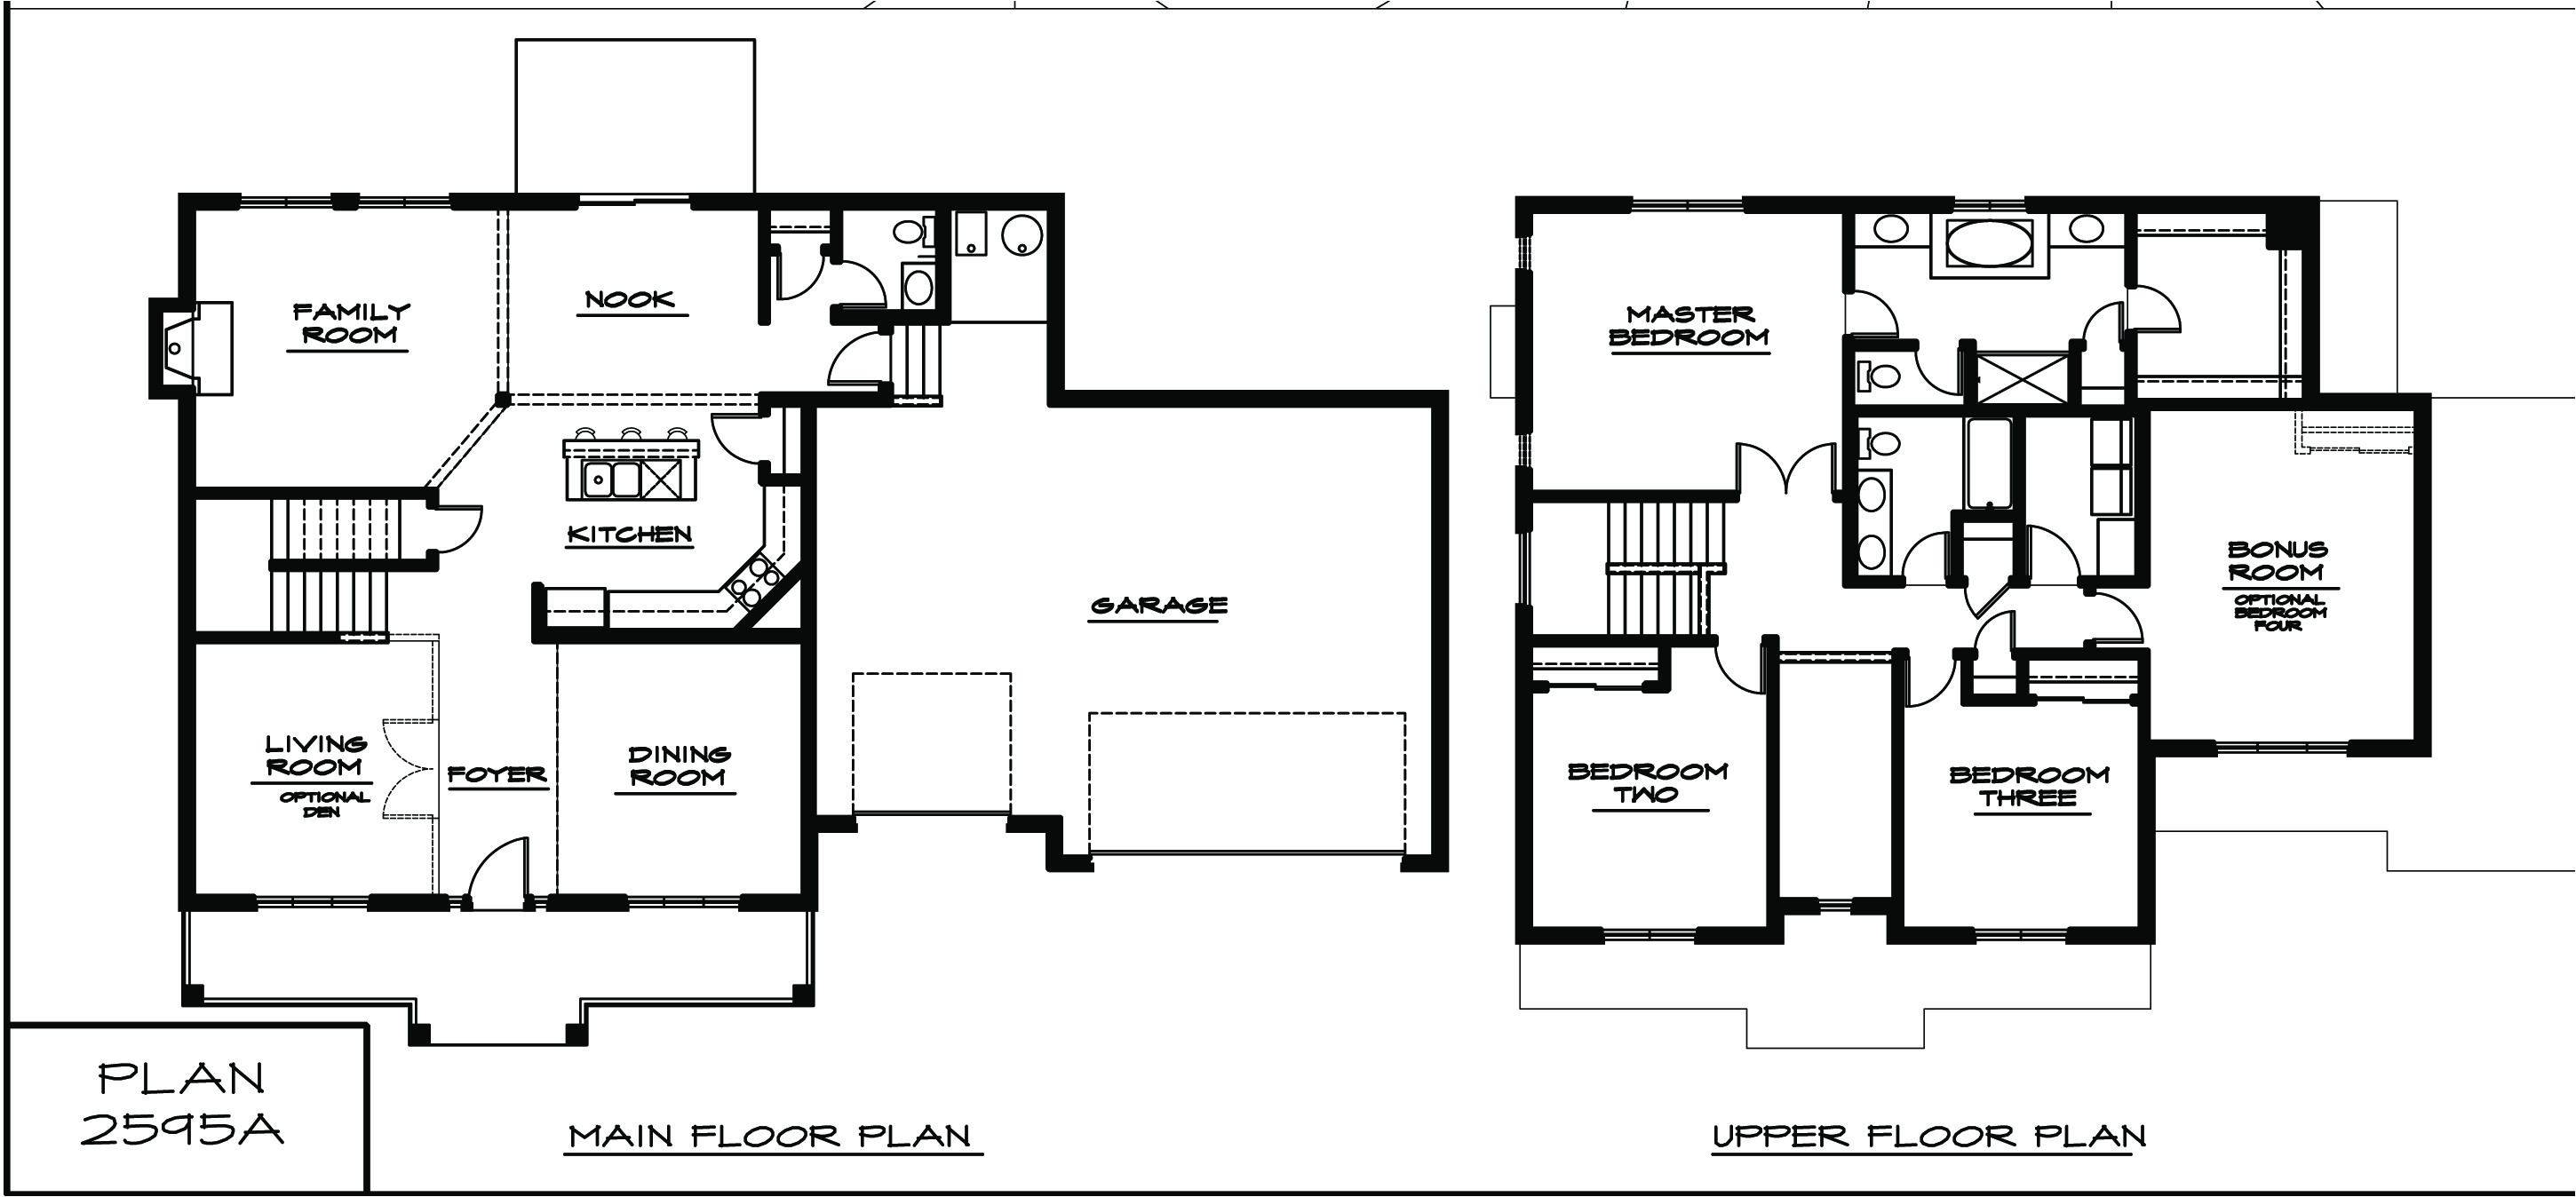 Two Story Home Floor Plans Architecture 4 Story House Plans with 3 Bedrooms Two